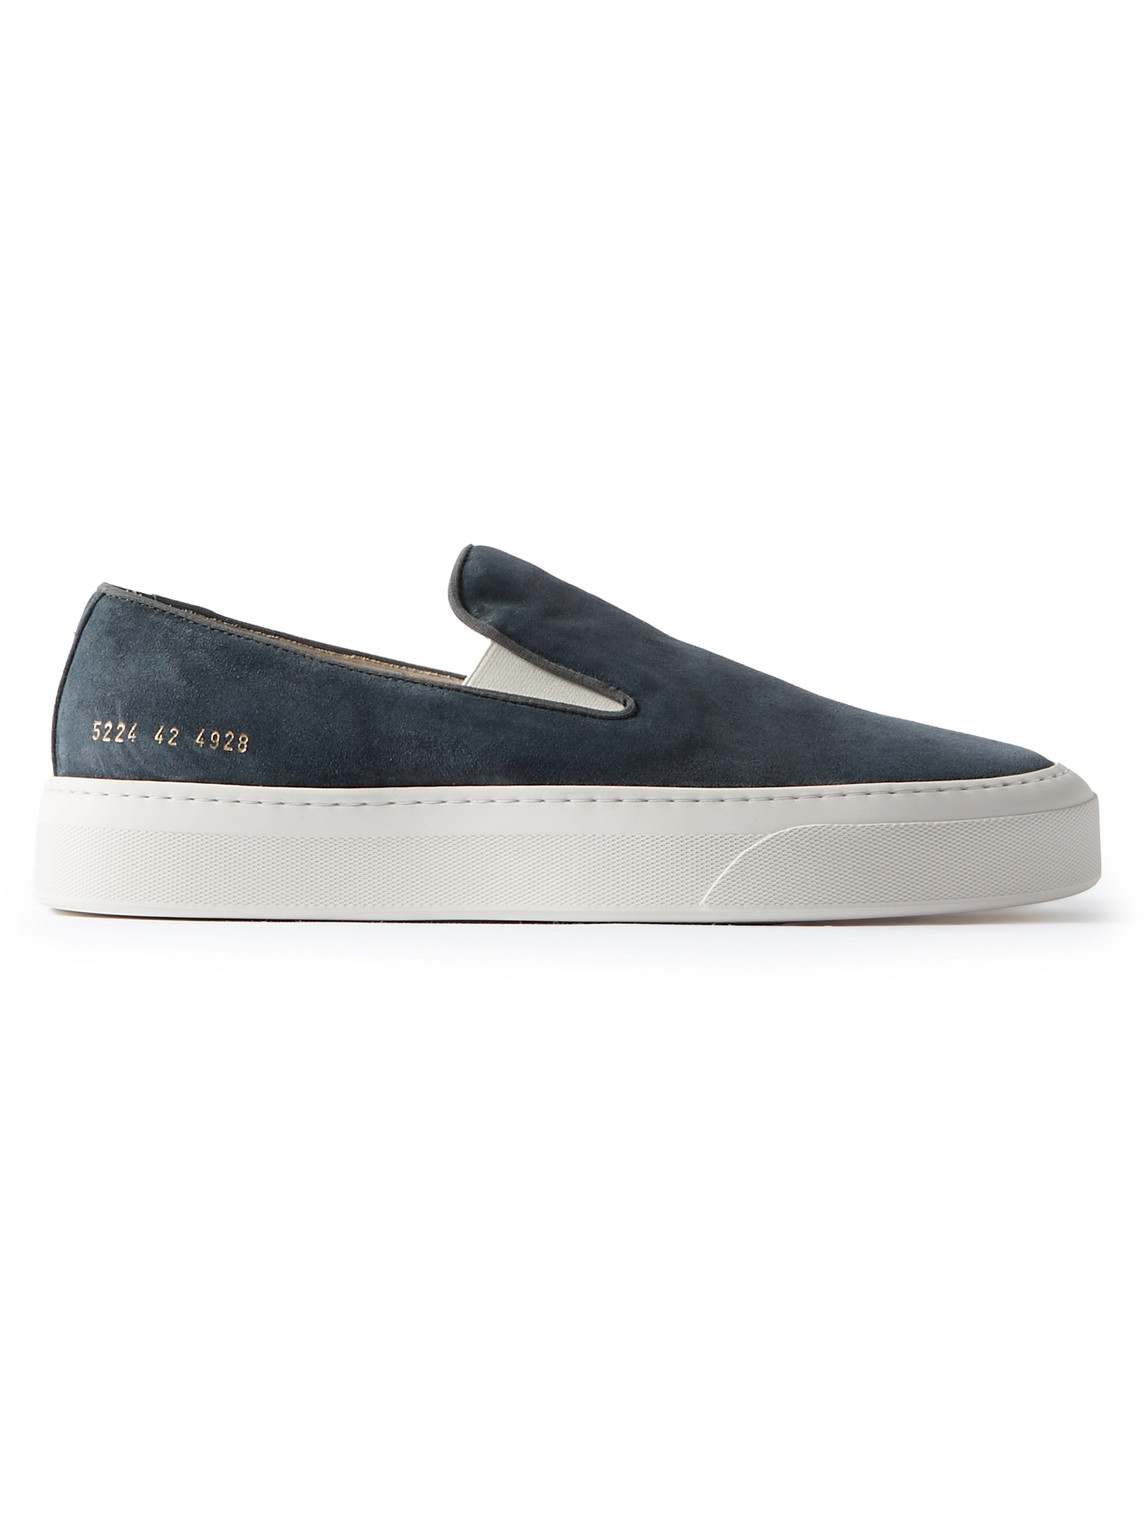 Common Projects - Suede Slip-On Sneakers - Men - Blue - EU 43 von Common Projects